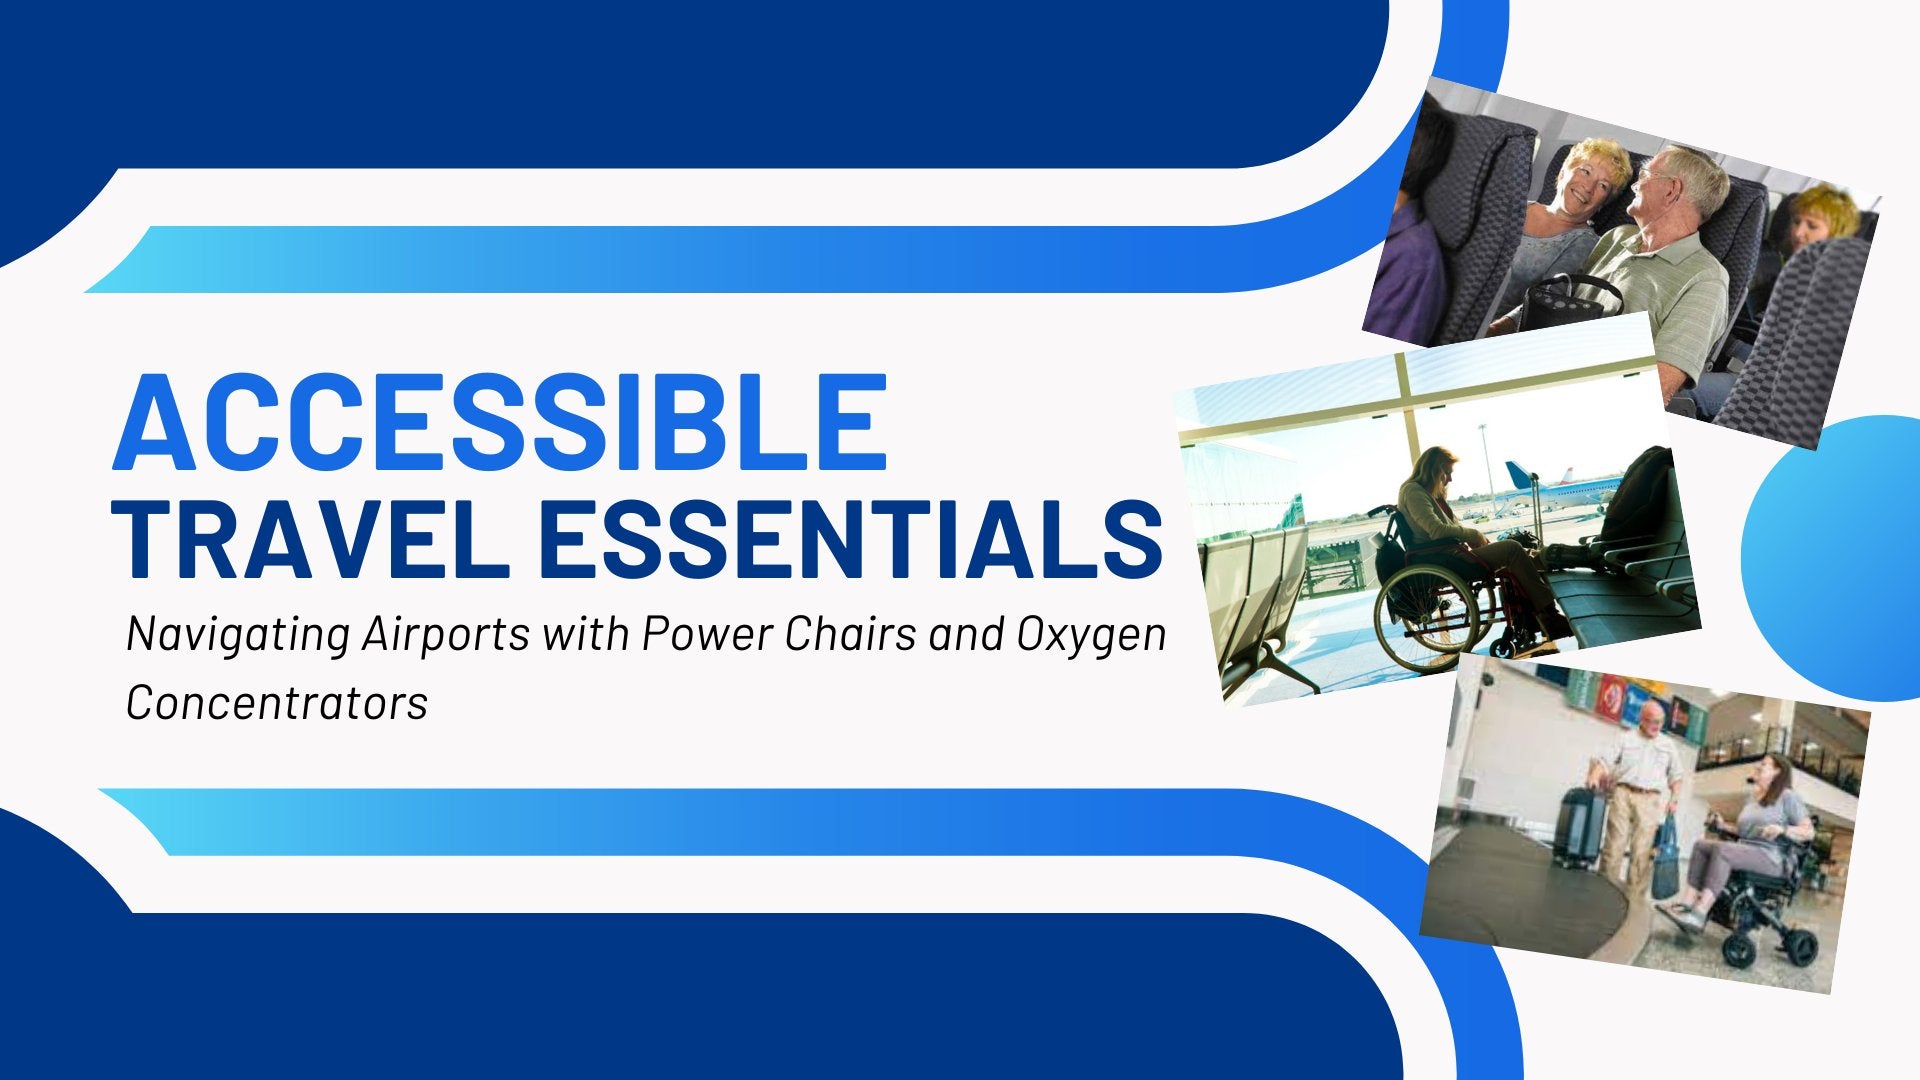 Accessible Travel Essentials: Navigating Airports with Power Chairs and Oxygen Concentrators